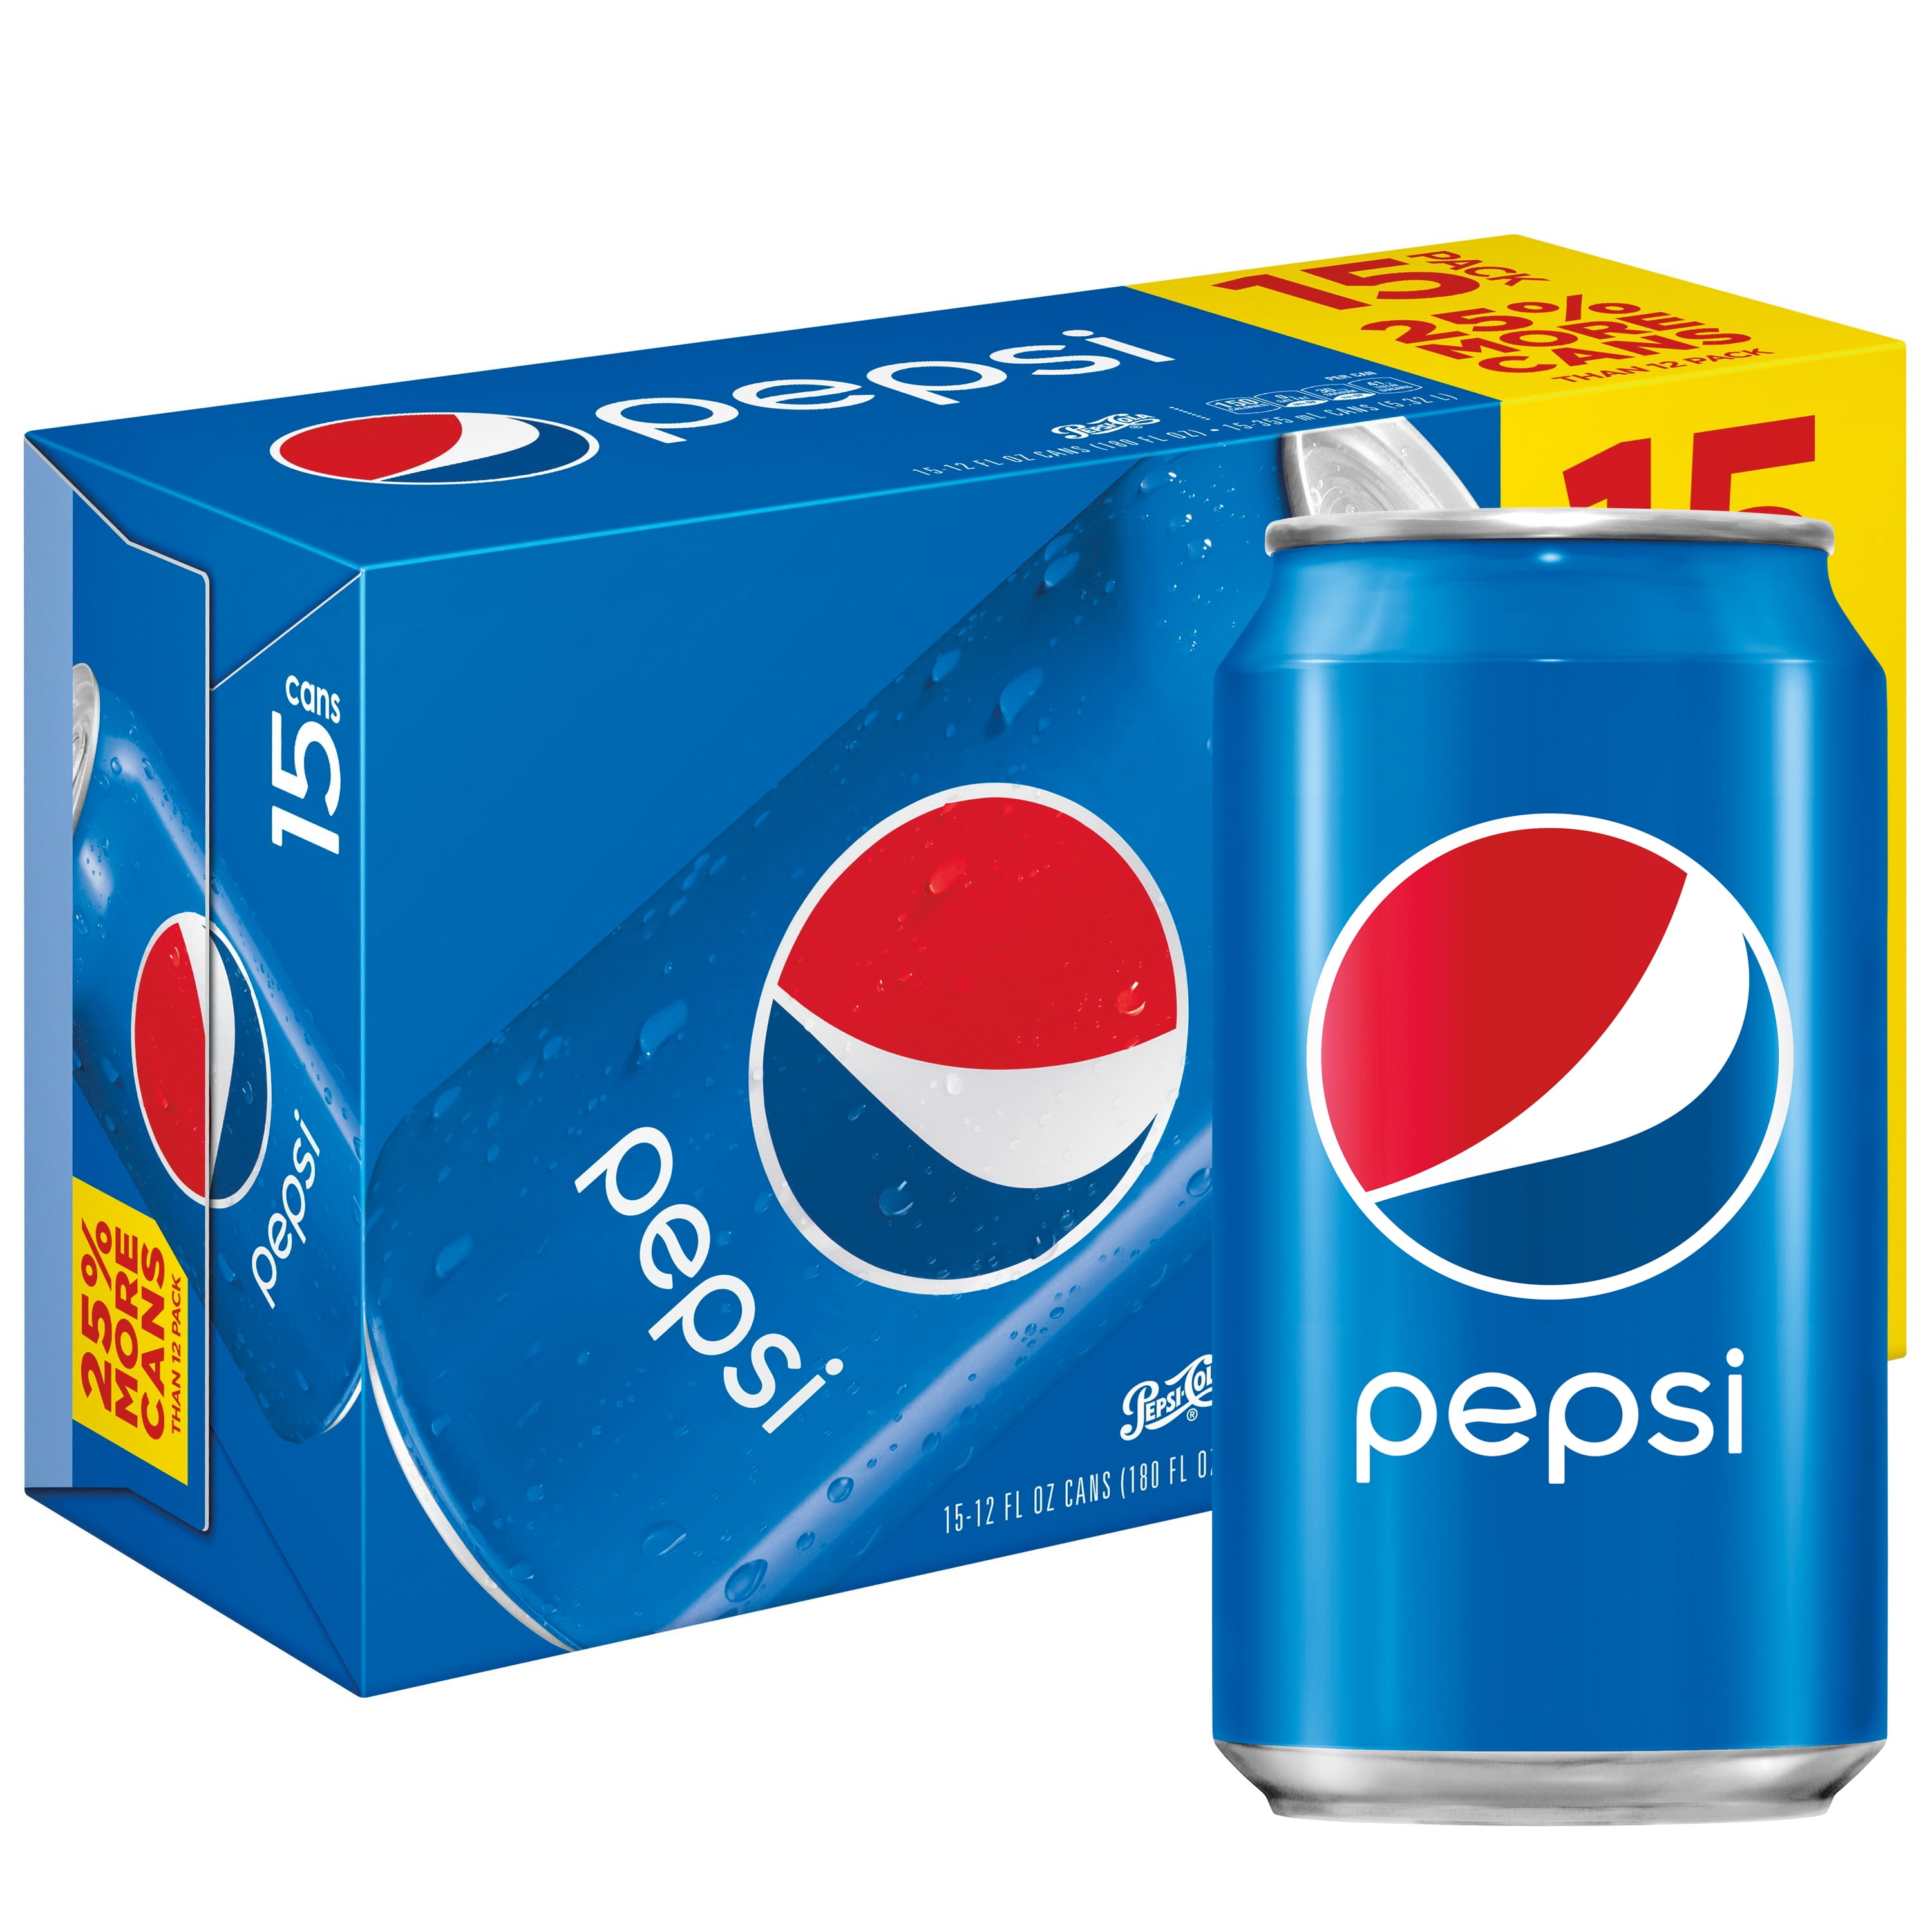 Buy Pepsi Soda Cola 12 Fl Oz 15 Count Cans Online at Lowest Price in ...